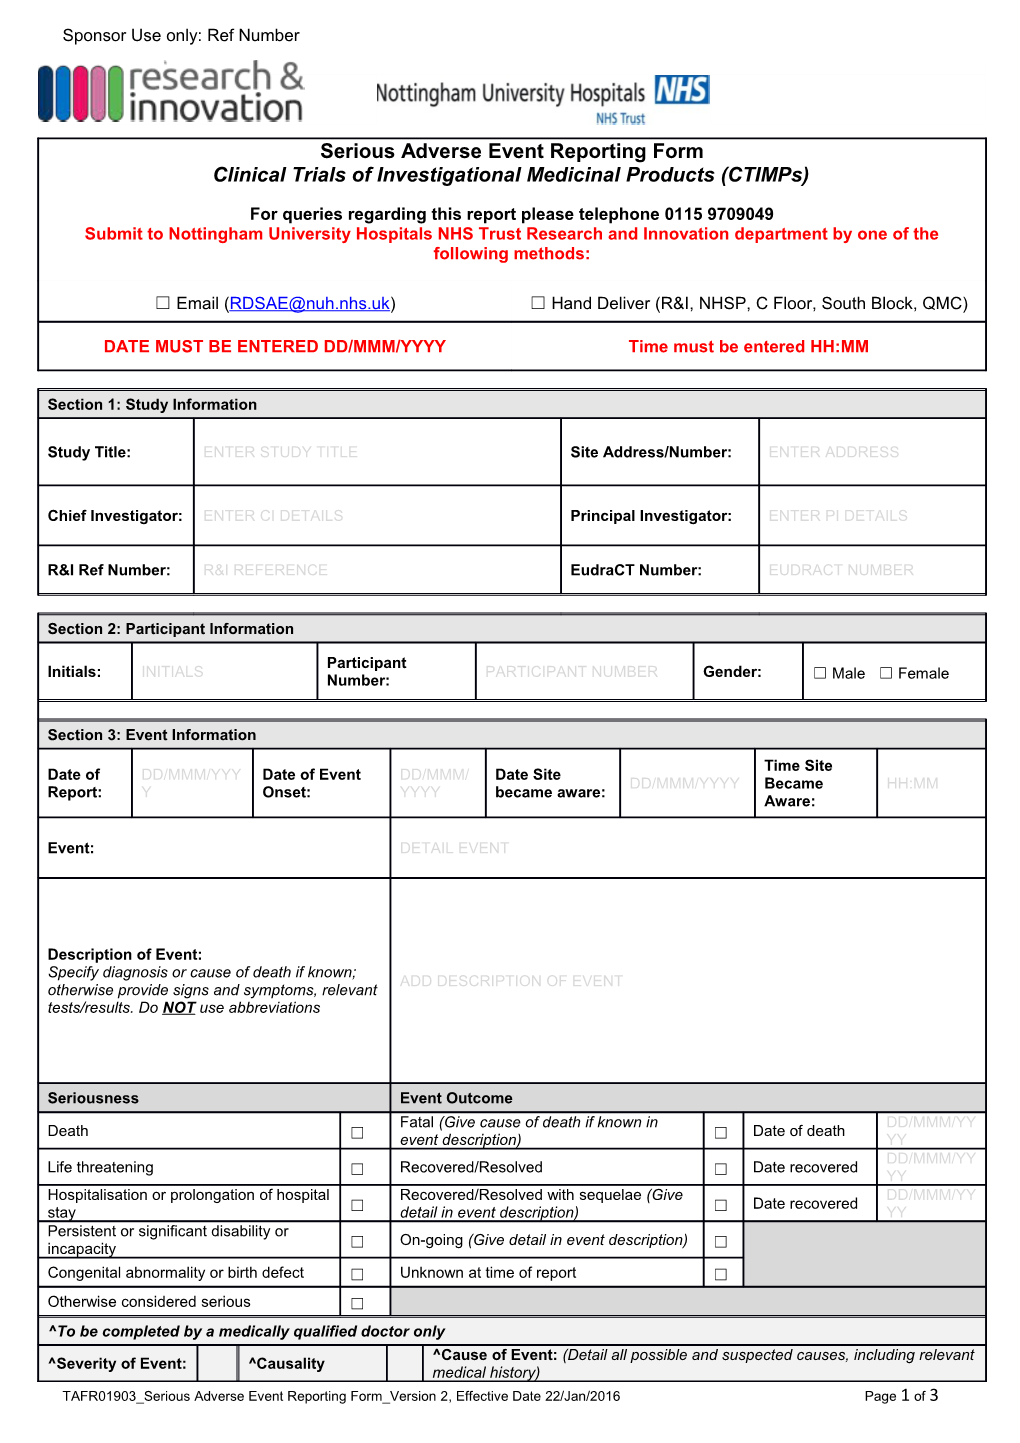 TAFR01903 Serious Adverse Event Reporting Form Version 2 , Effective Date 22/Jan/2016Page 1 of 3